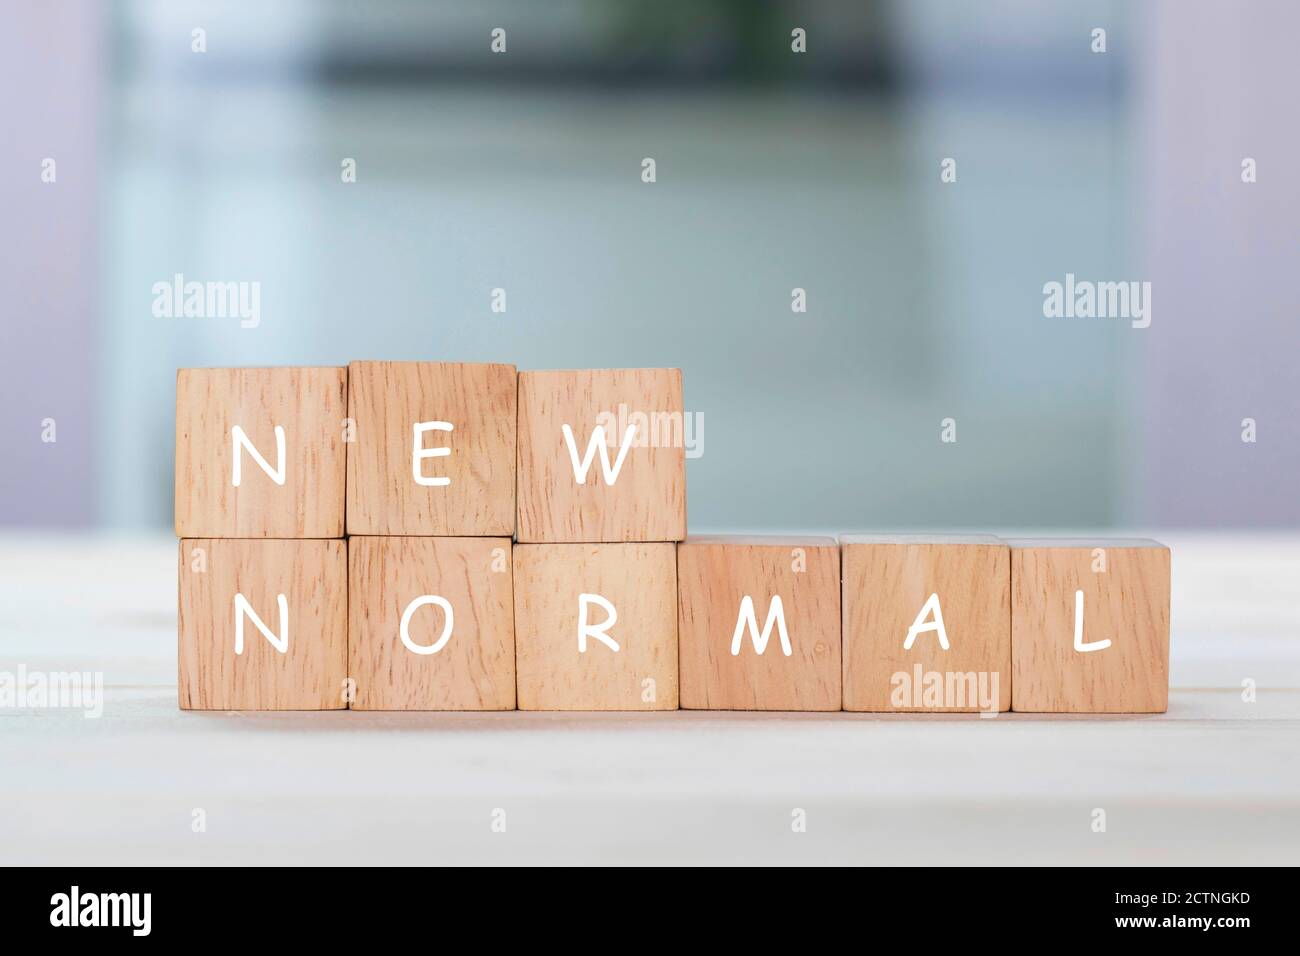 New normal on wooden cube with blurred background. Stock Photo